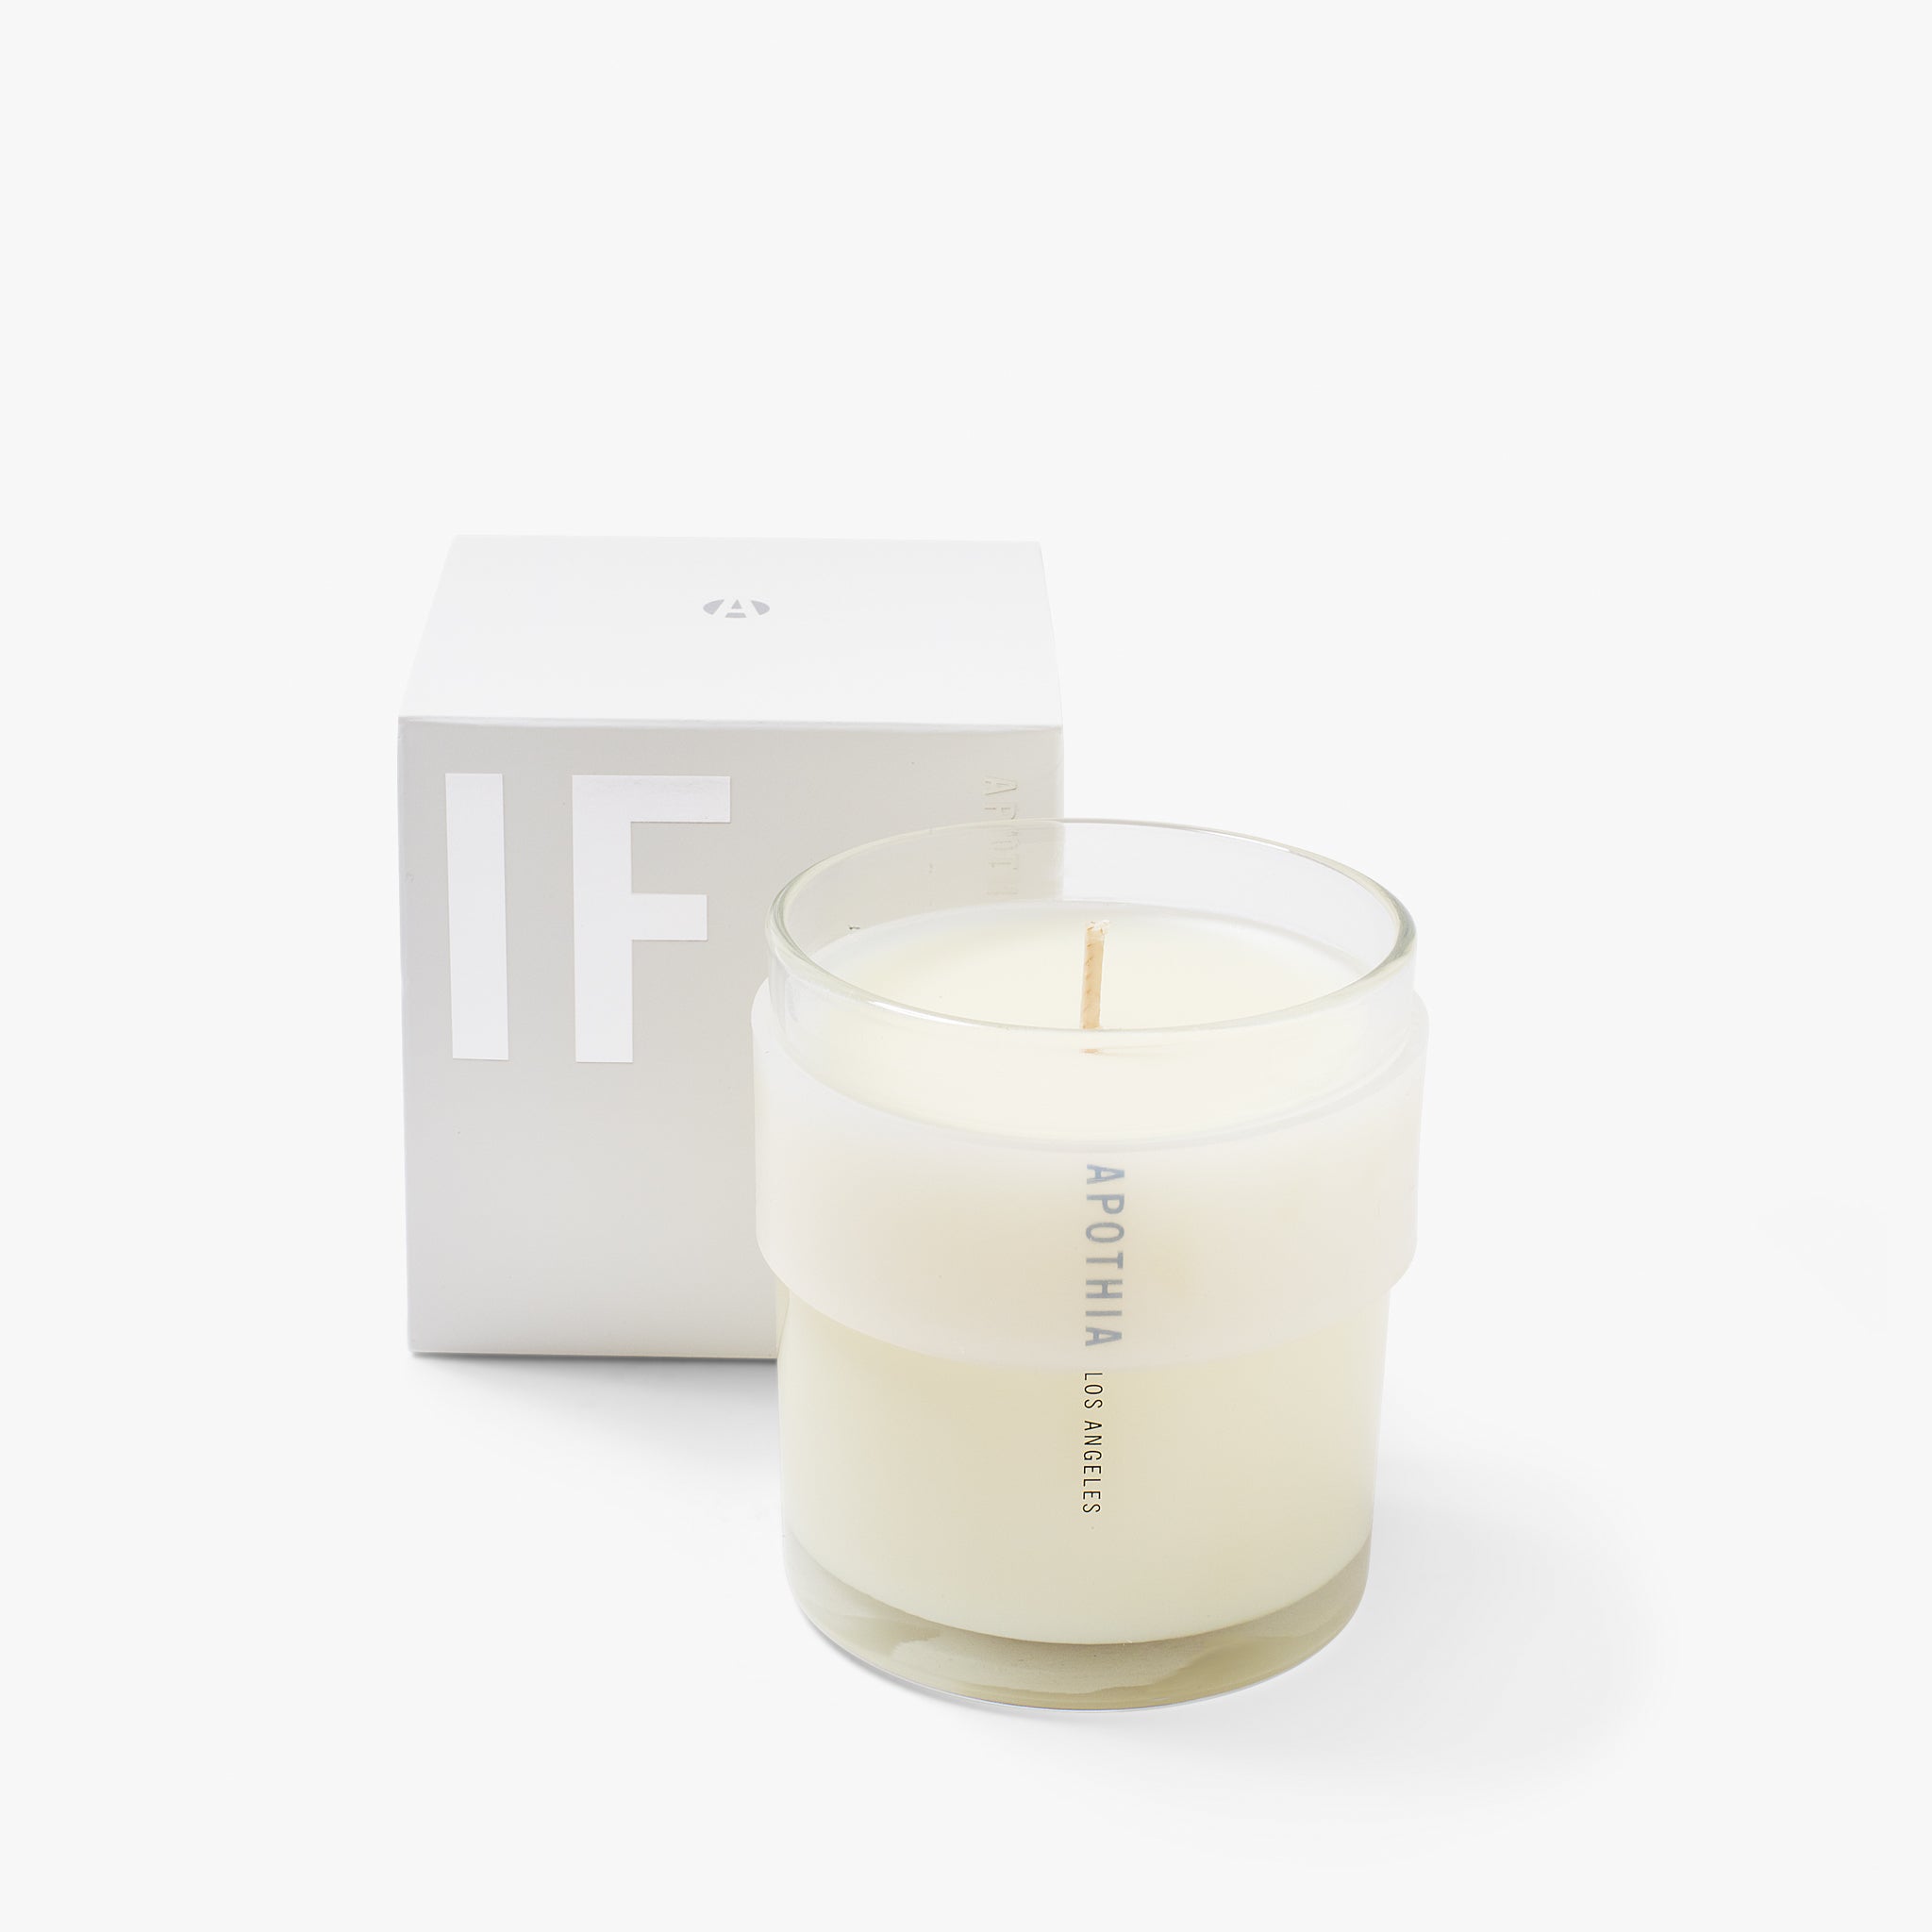 IF Candle